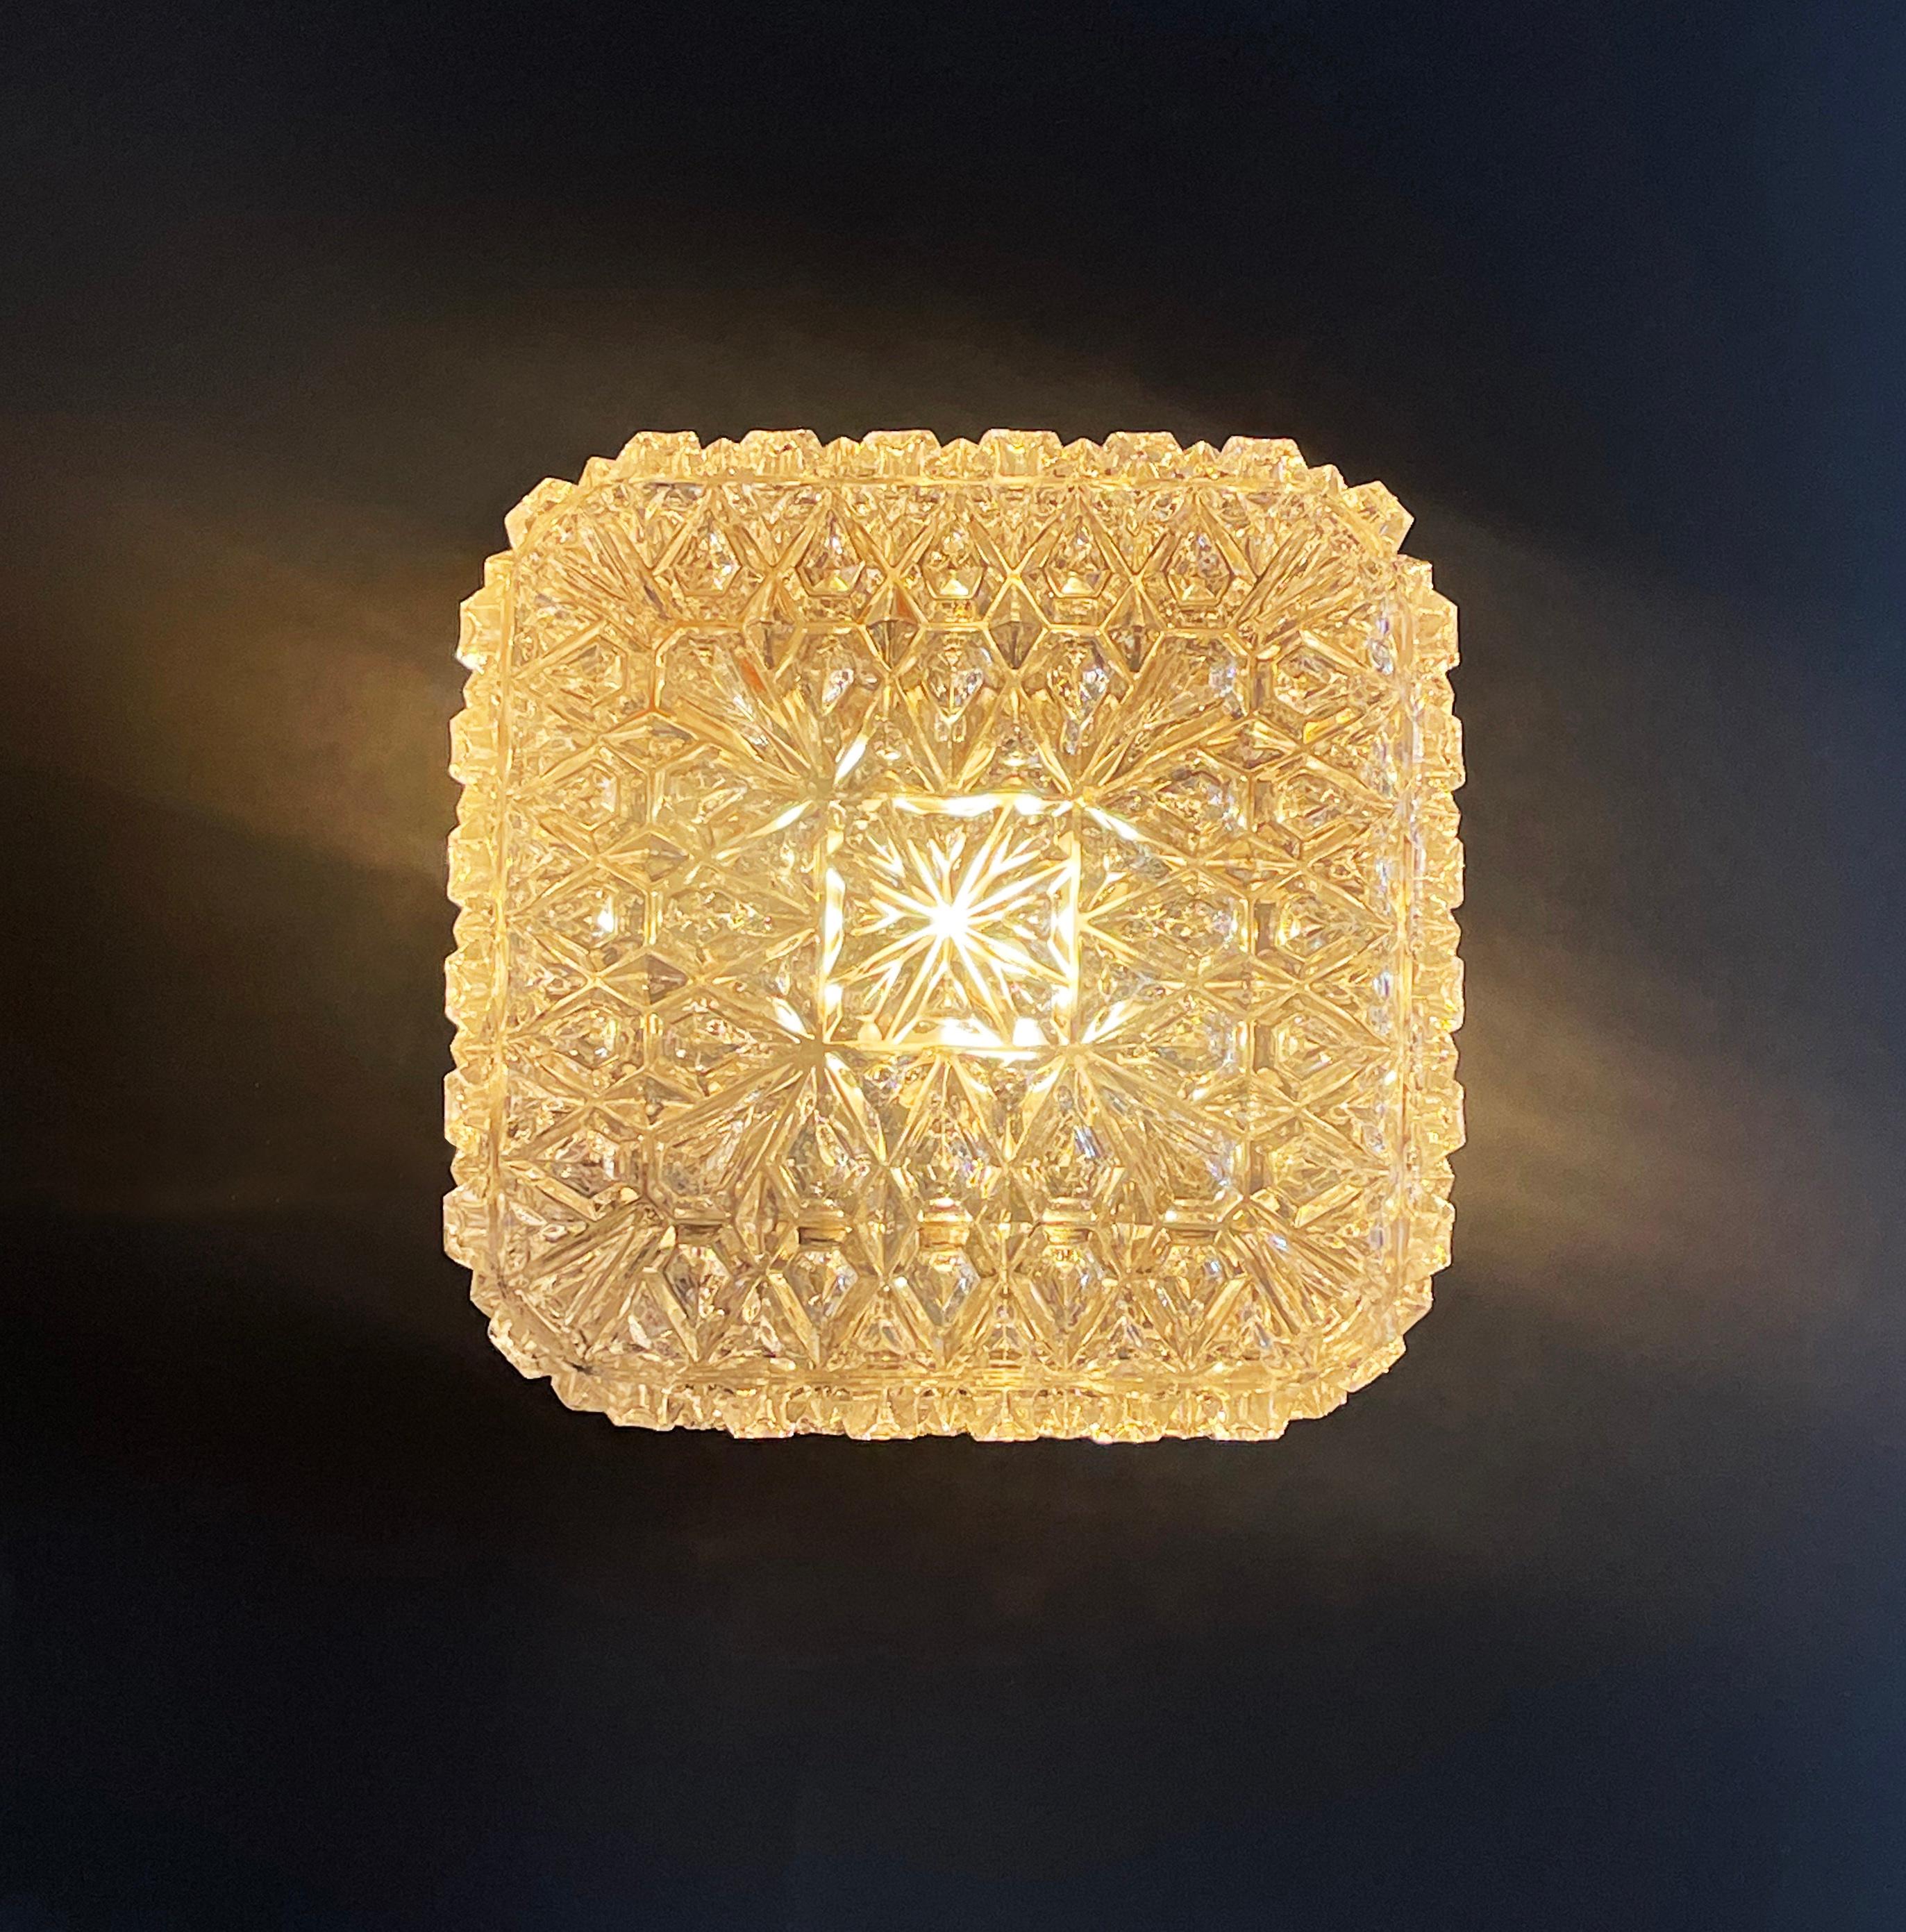 Magnificent flush base ceiling or wall lamp by ''Glashütte Limburg'', Germans famous mid century manufacturer of high-end design lighting.
Comes in a rocky ice crystal like square shape in 2 subtle levels on the top. 
The lampshade consists of ice